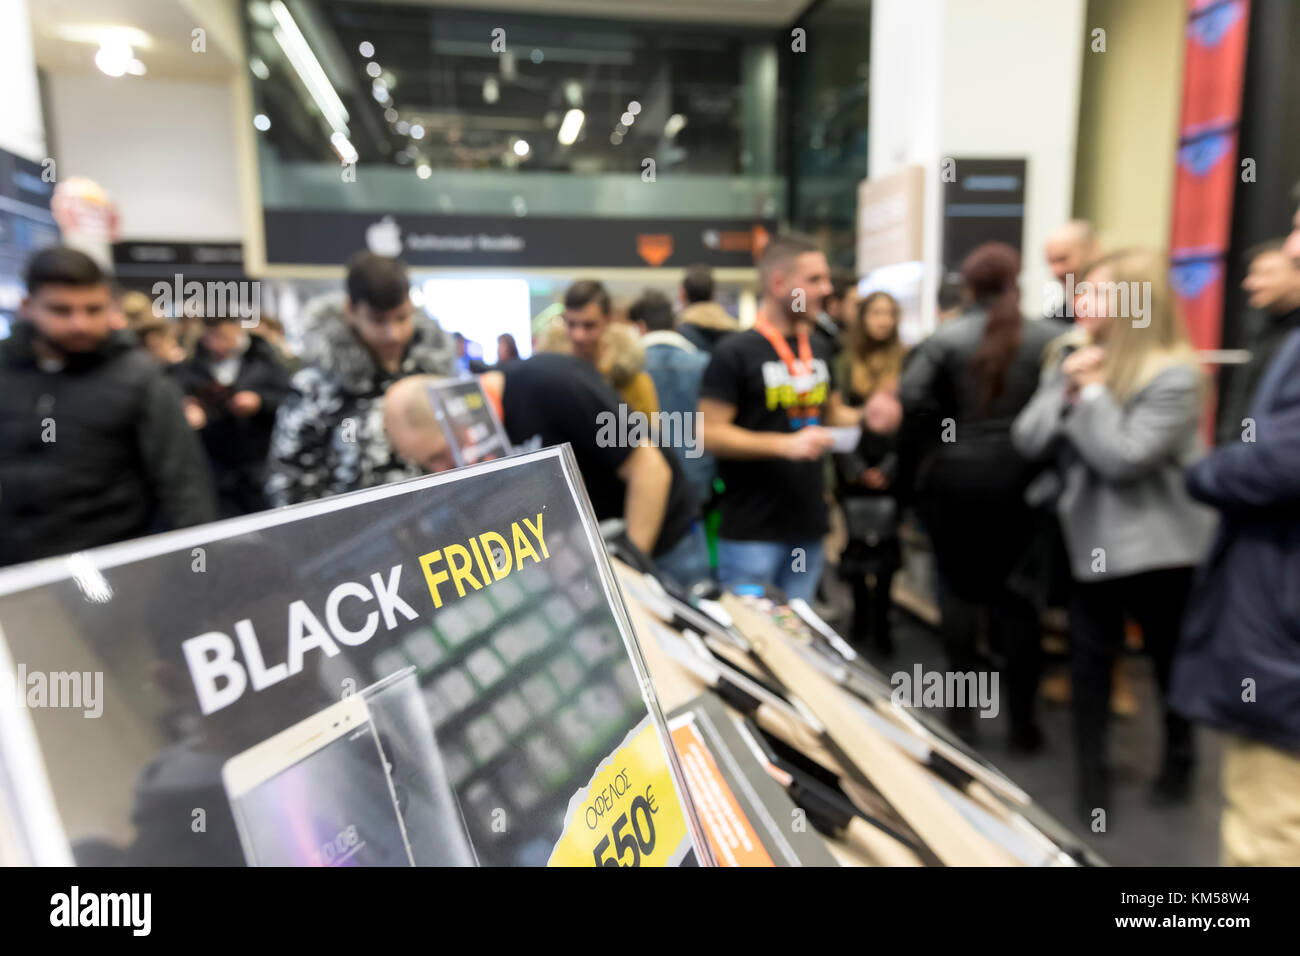 Thessaloniki, Greece - November 24, 2017. People shop inside a department store during Black Friday shopping deals, at the northern Greek city of Thes Stock Photo